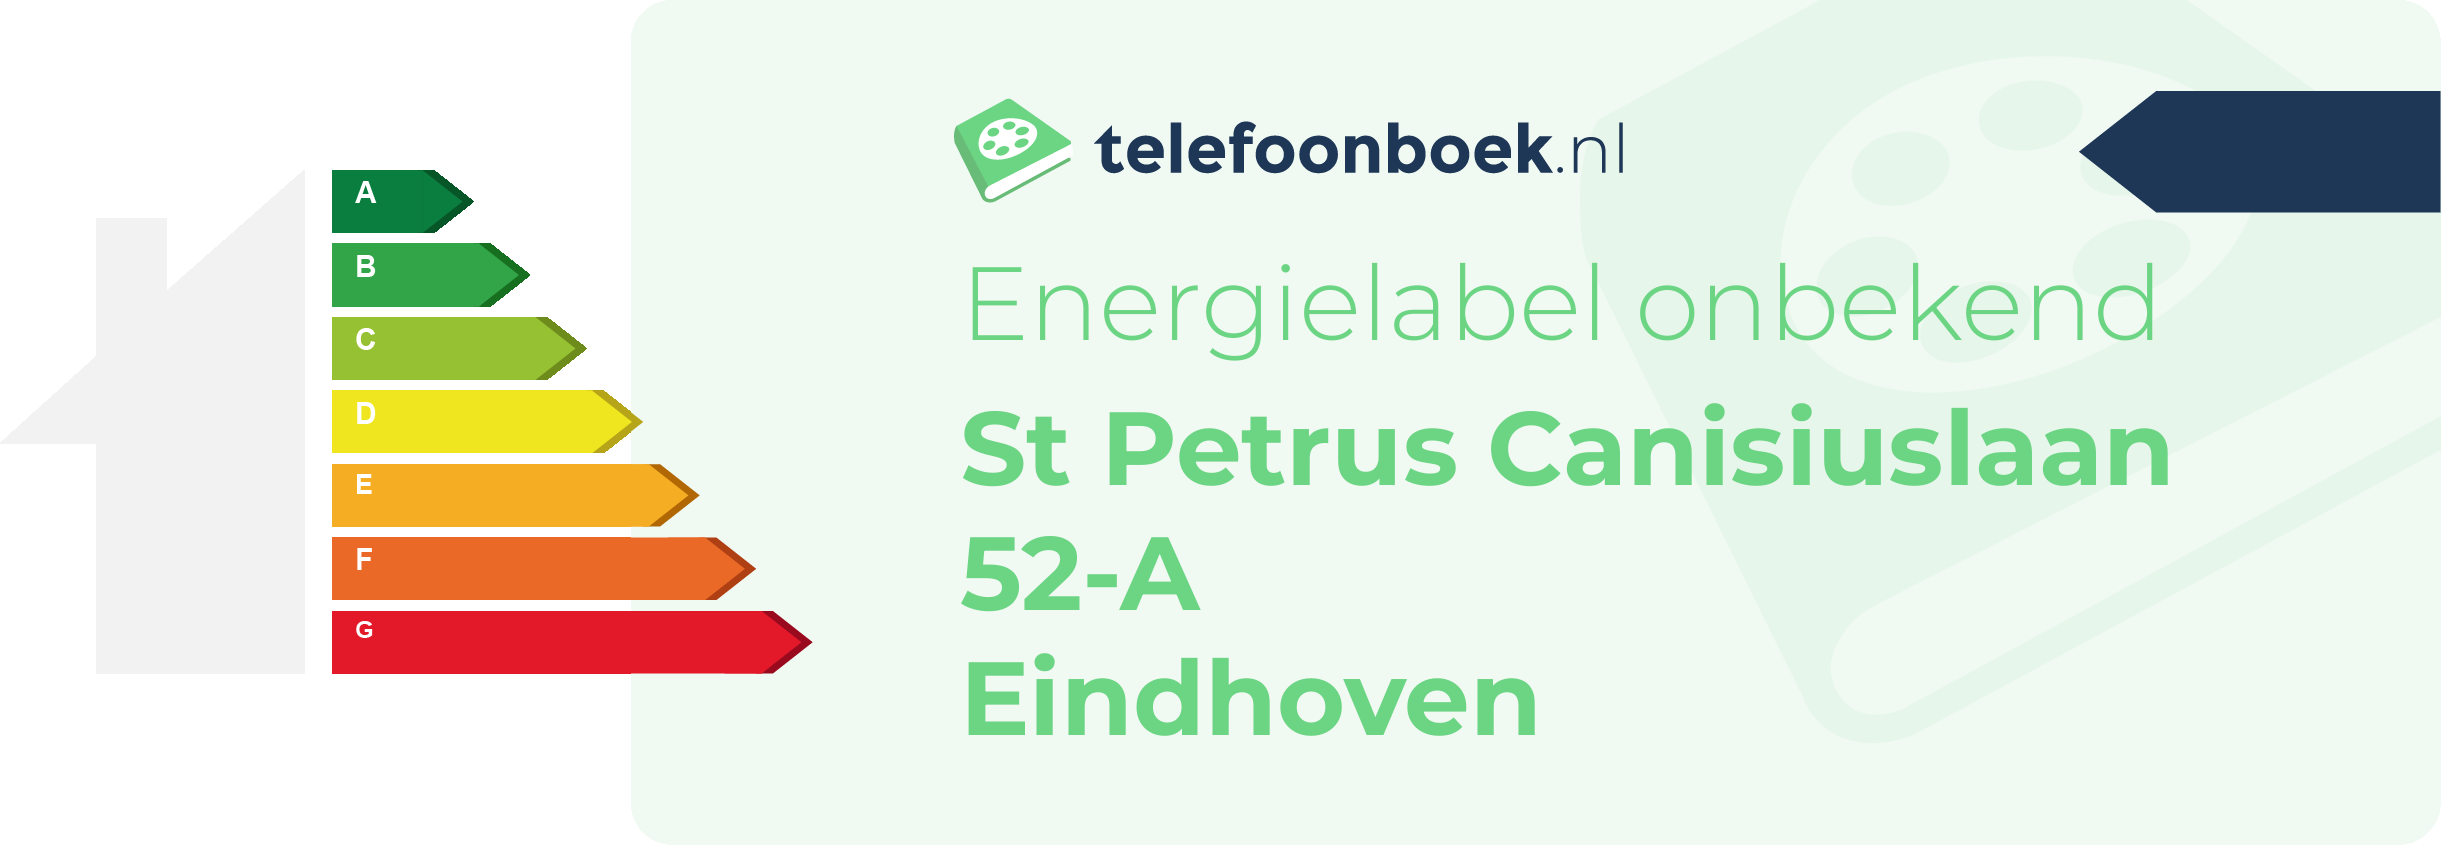 Energielabel St Petrus Canisiuslaan 52-A Eindhoven